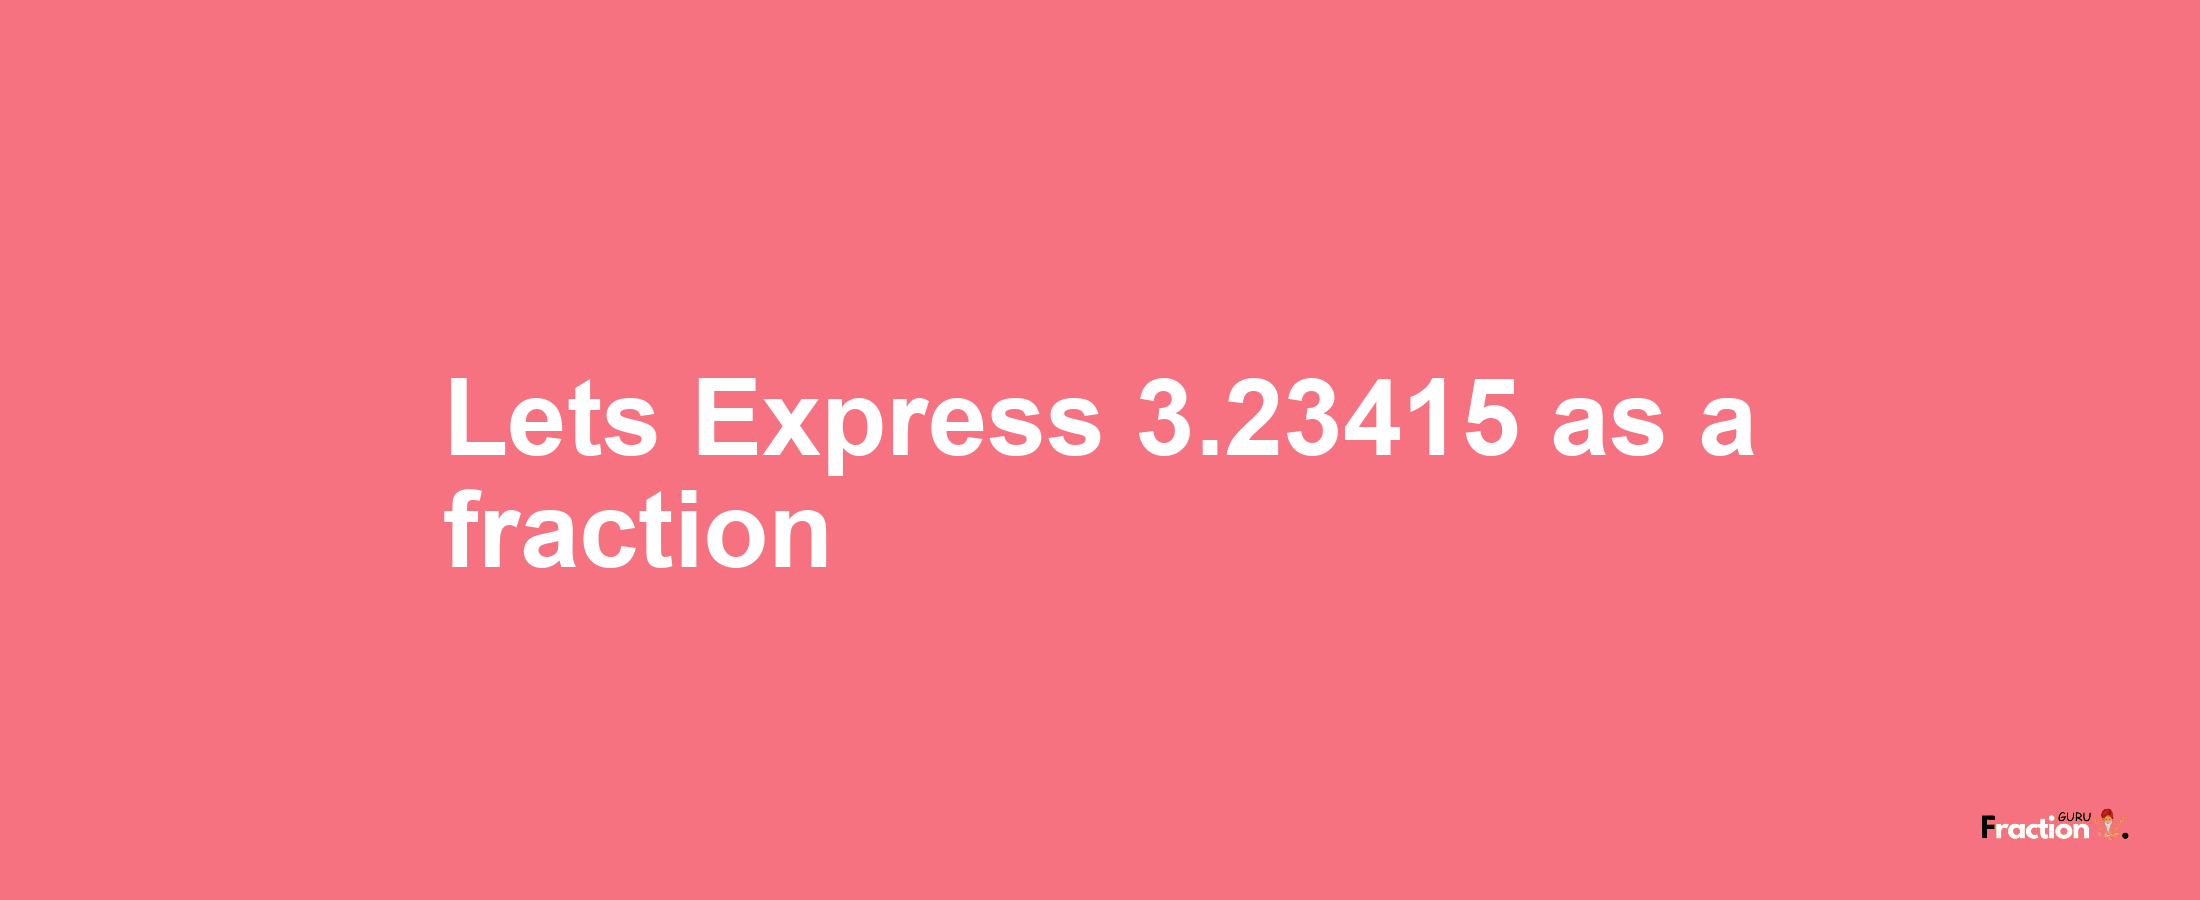 Lets Express 3.23415 as afraction